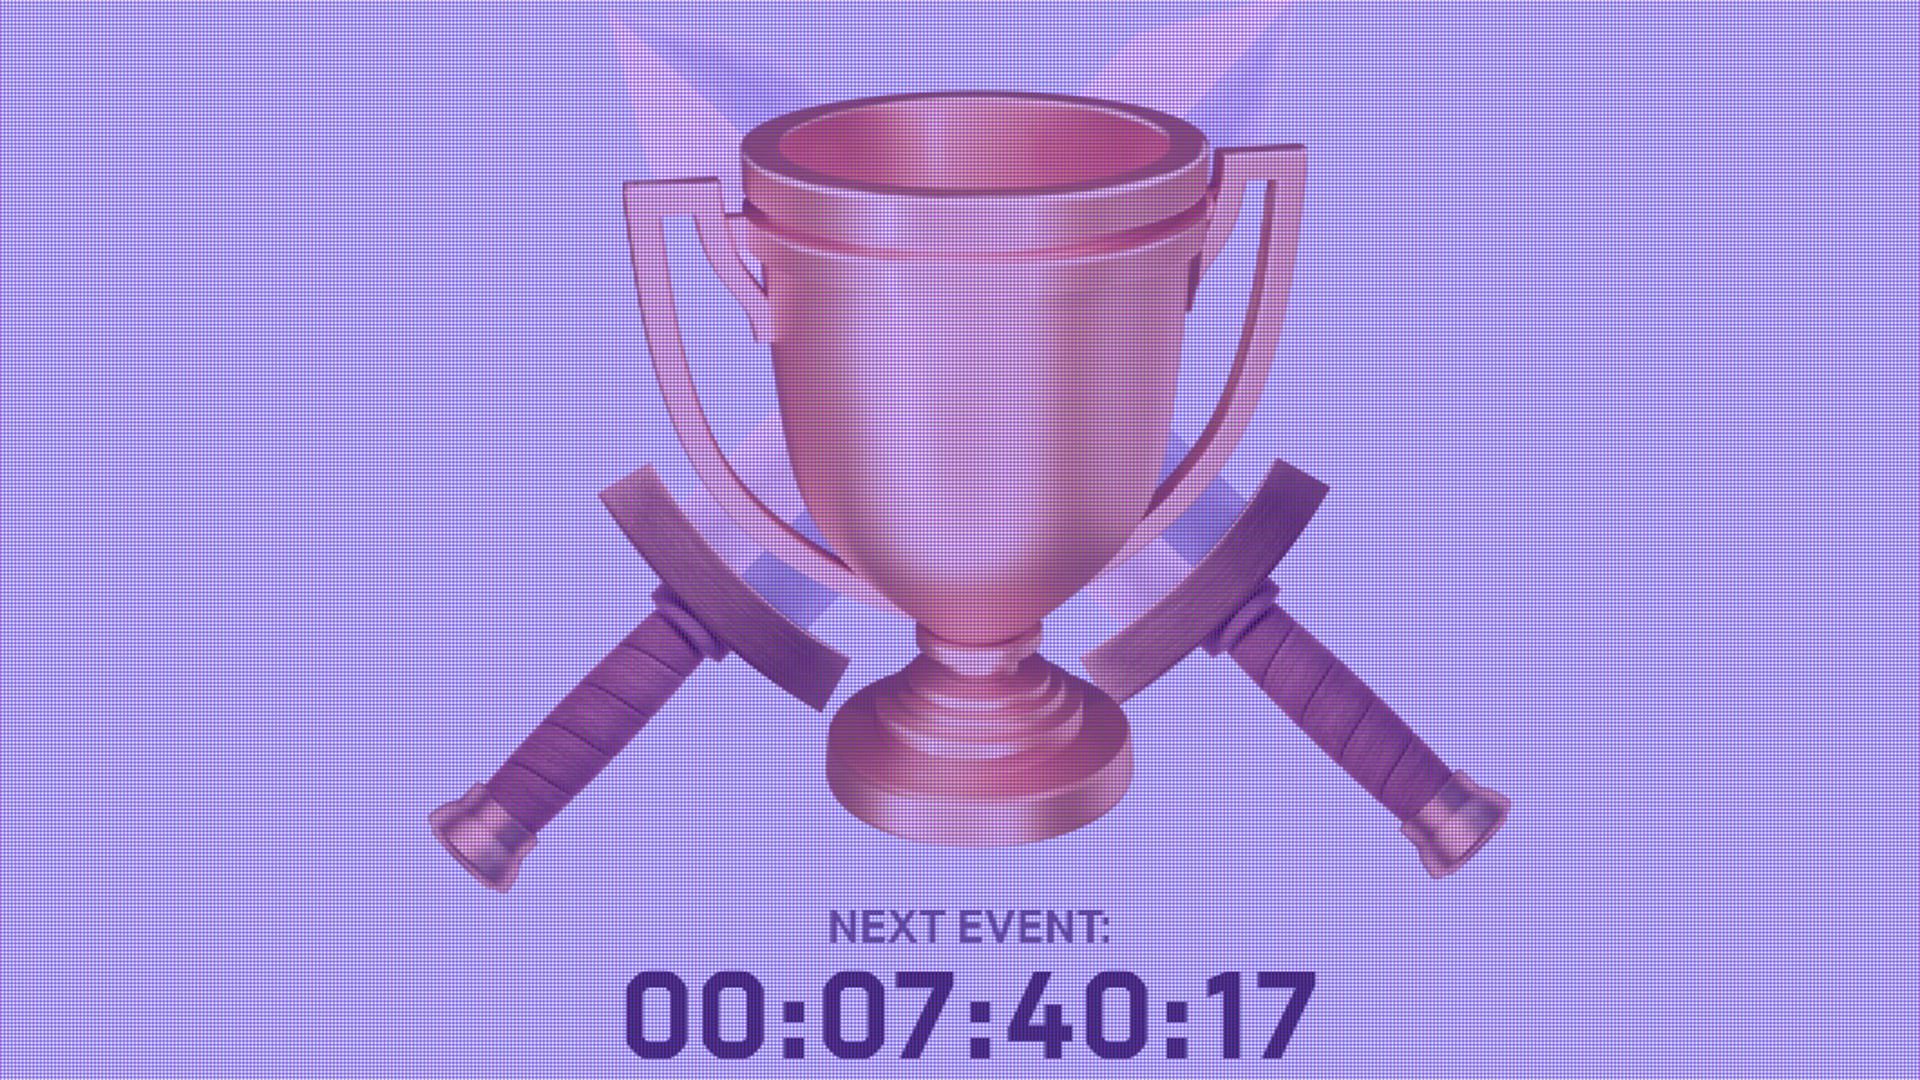 Countdown timer (Image via Supercell)